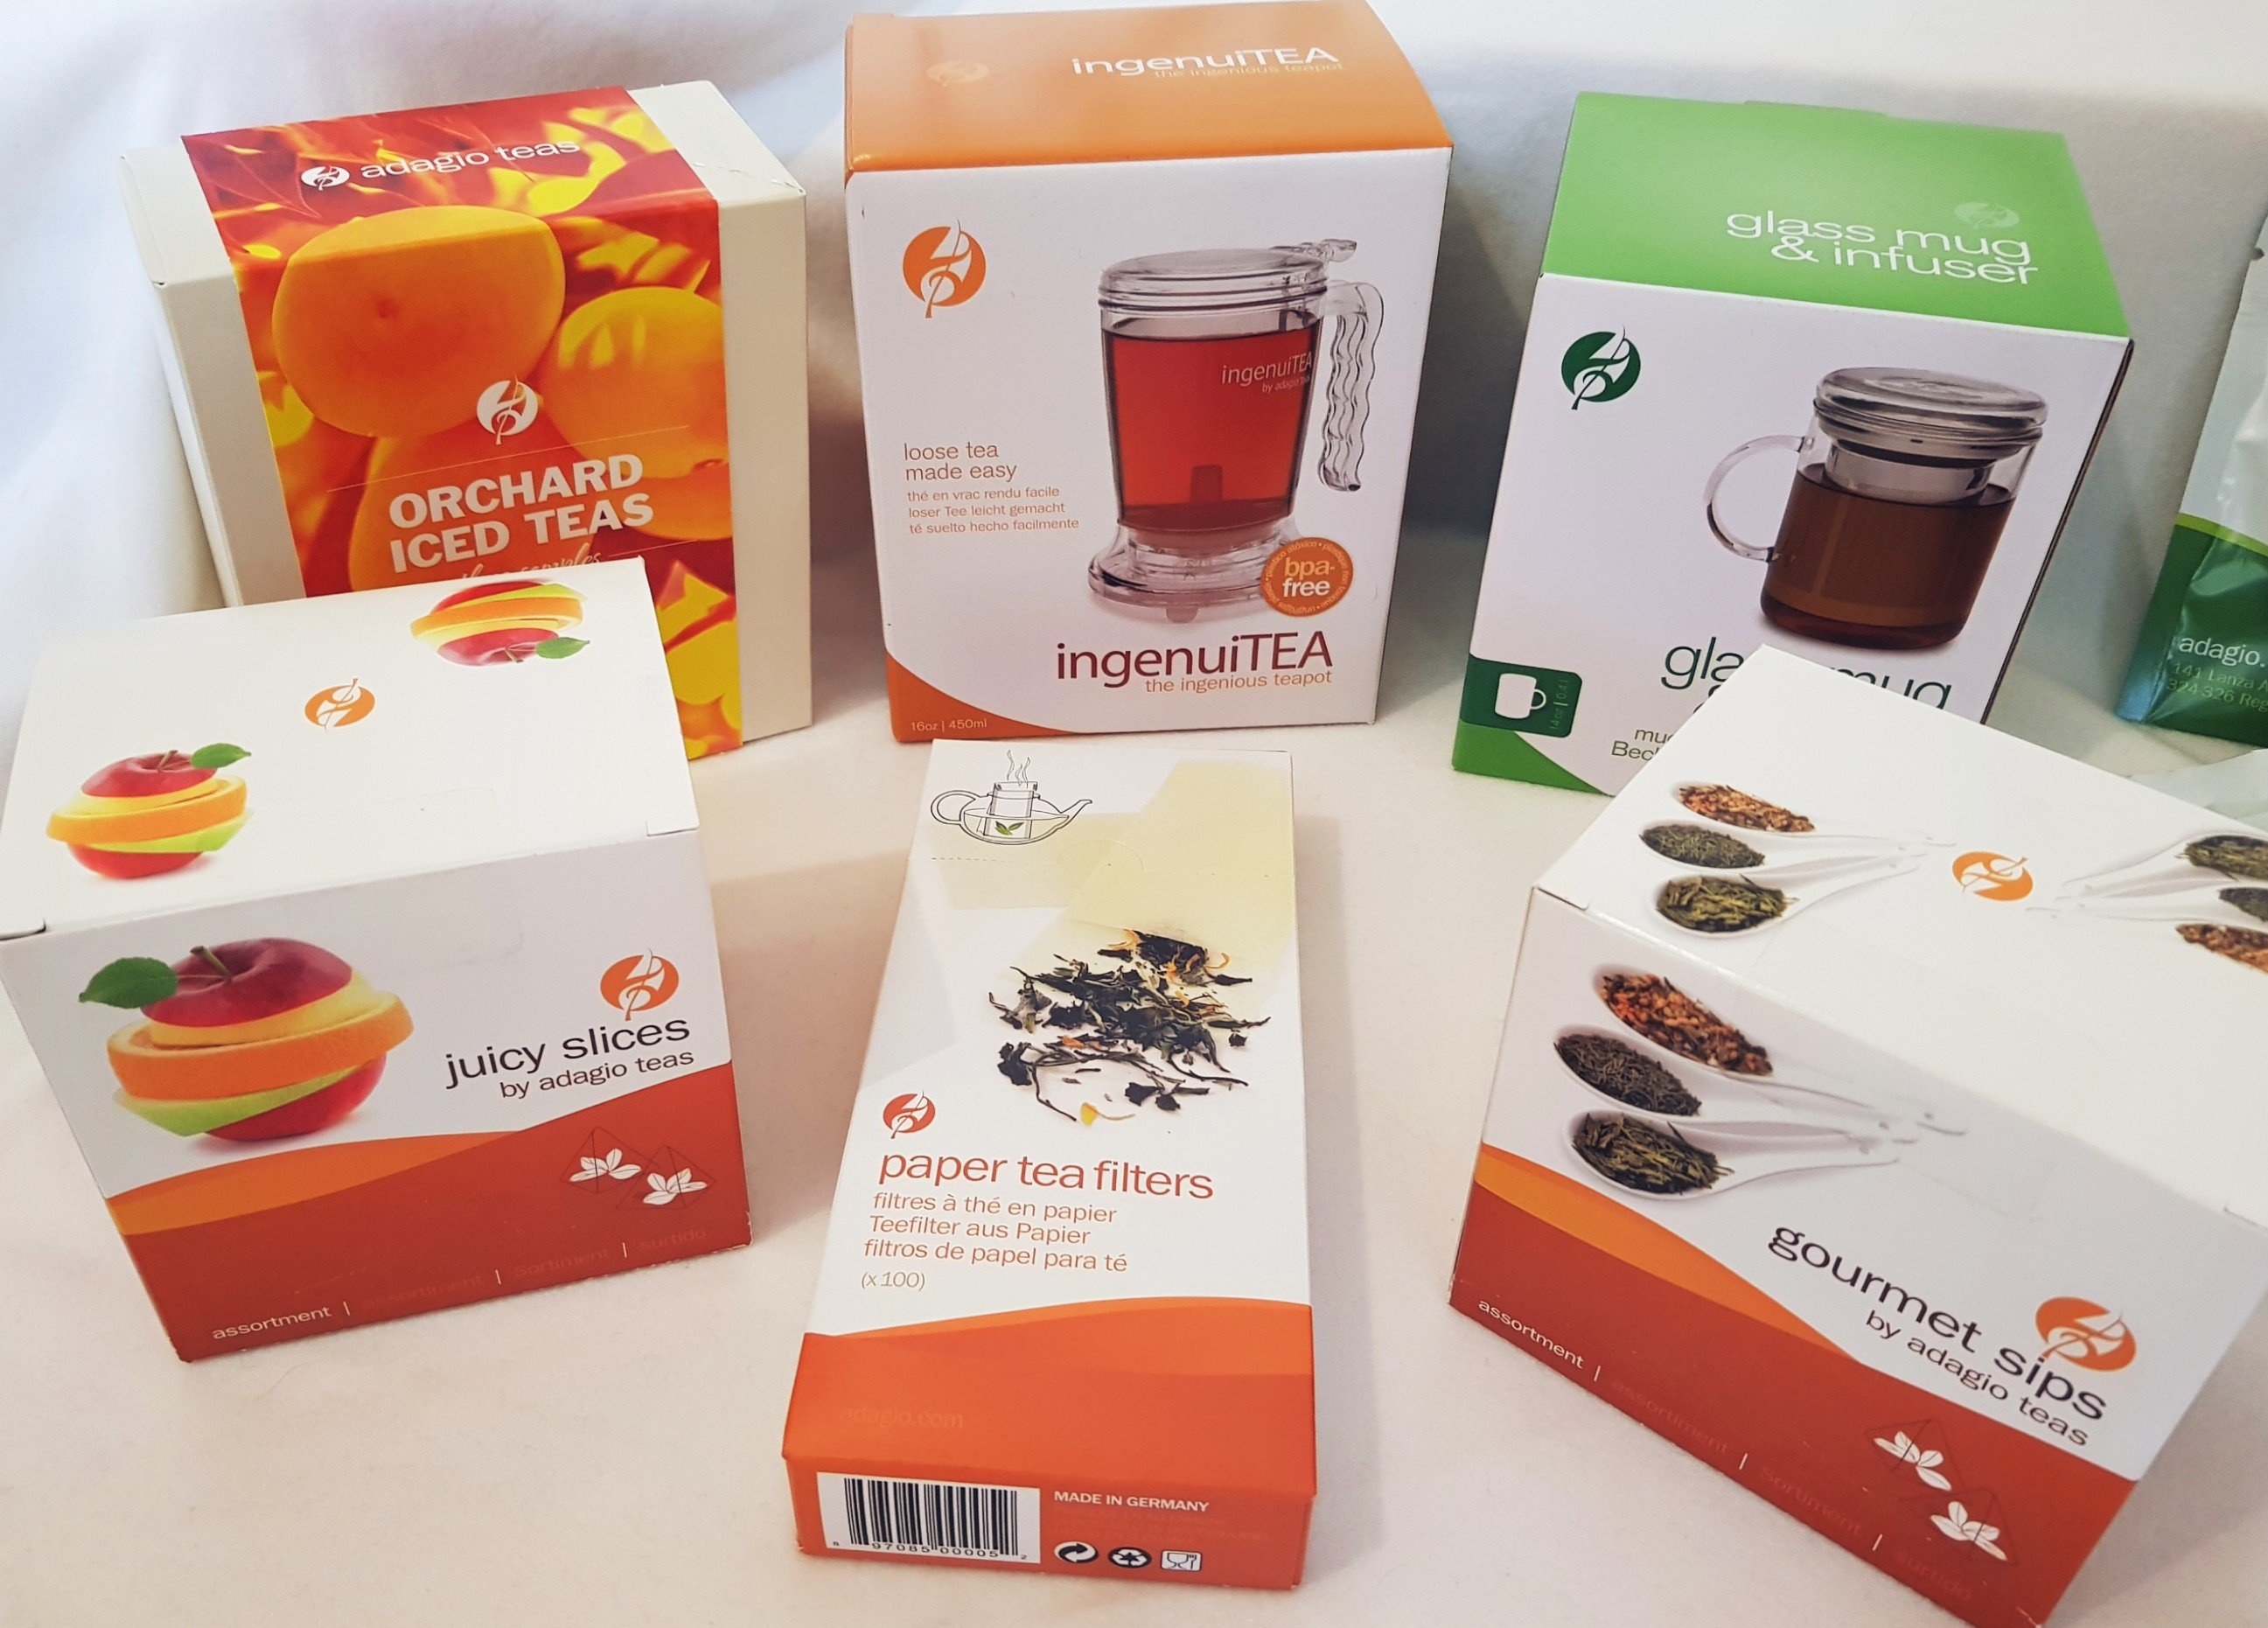 A selection of Adagio Teas and accessories